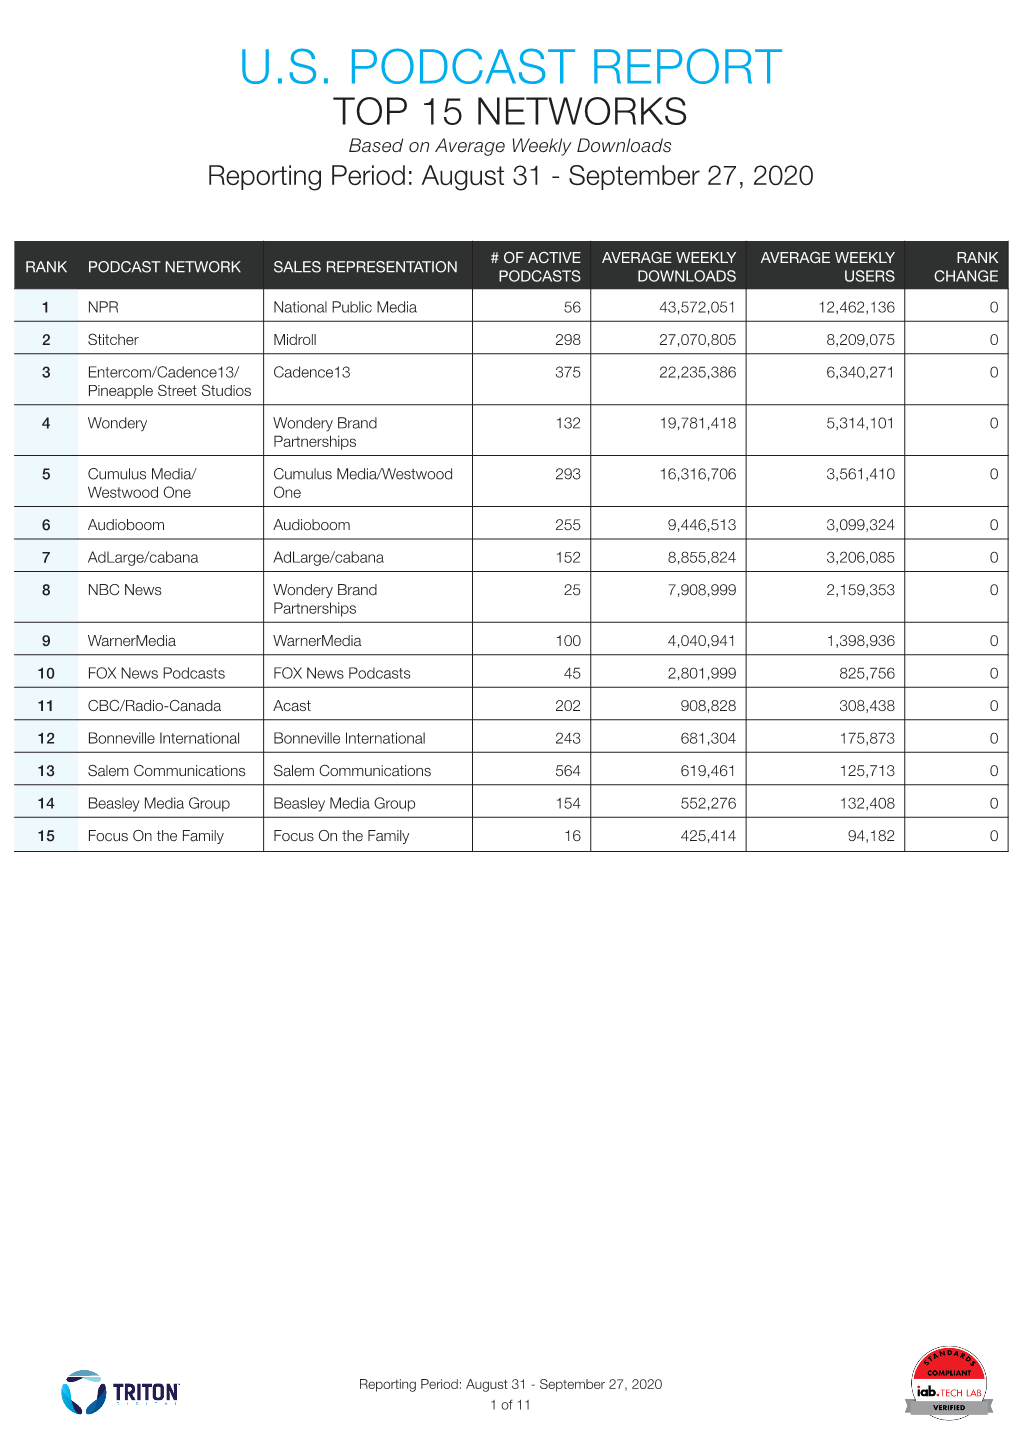 U.S. PODCAST REPORT TOP 15 NETWORKS Based on Average Weekly Downloads Reporting Period: August 31 - September 27, 2020